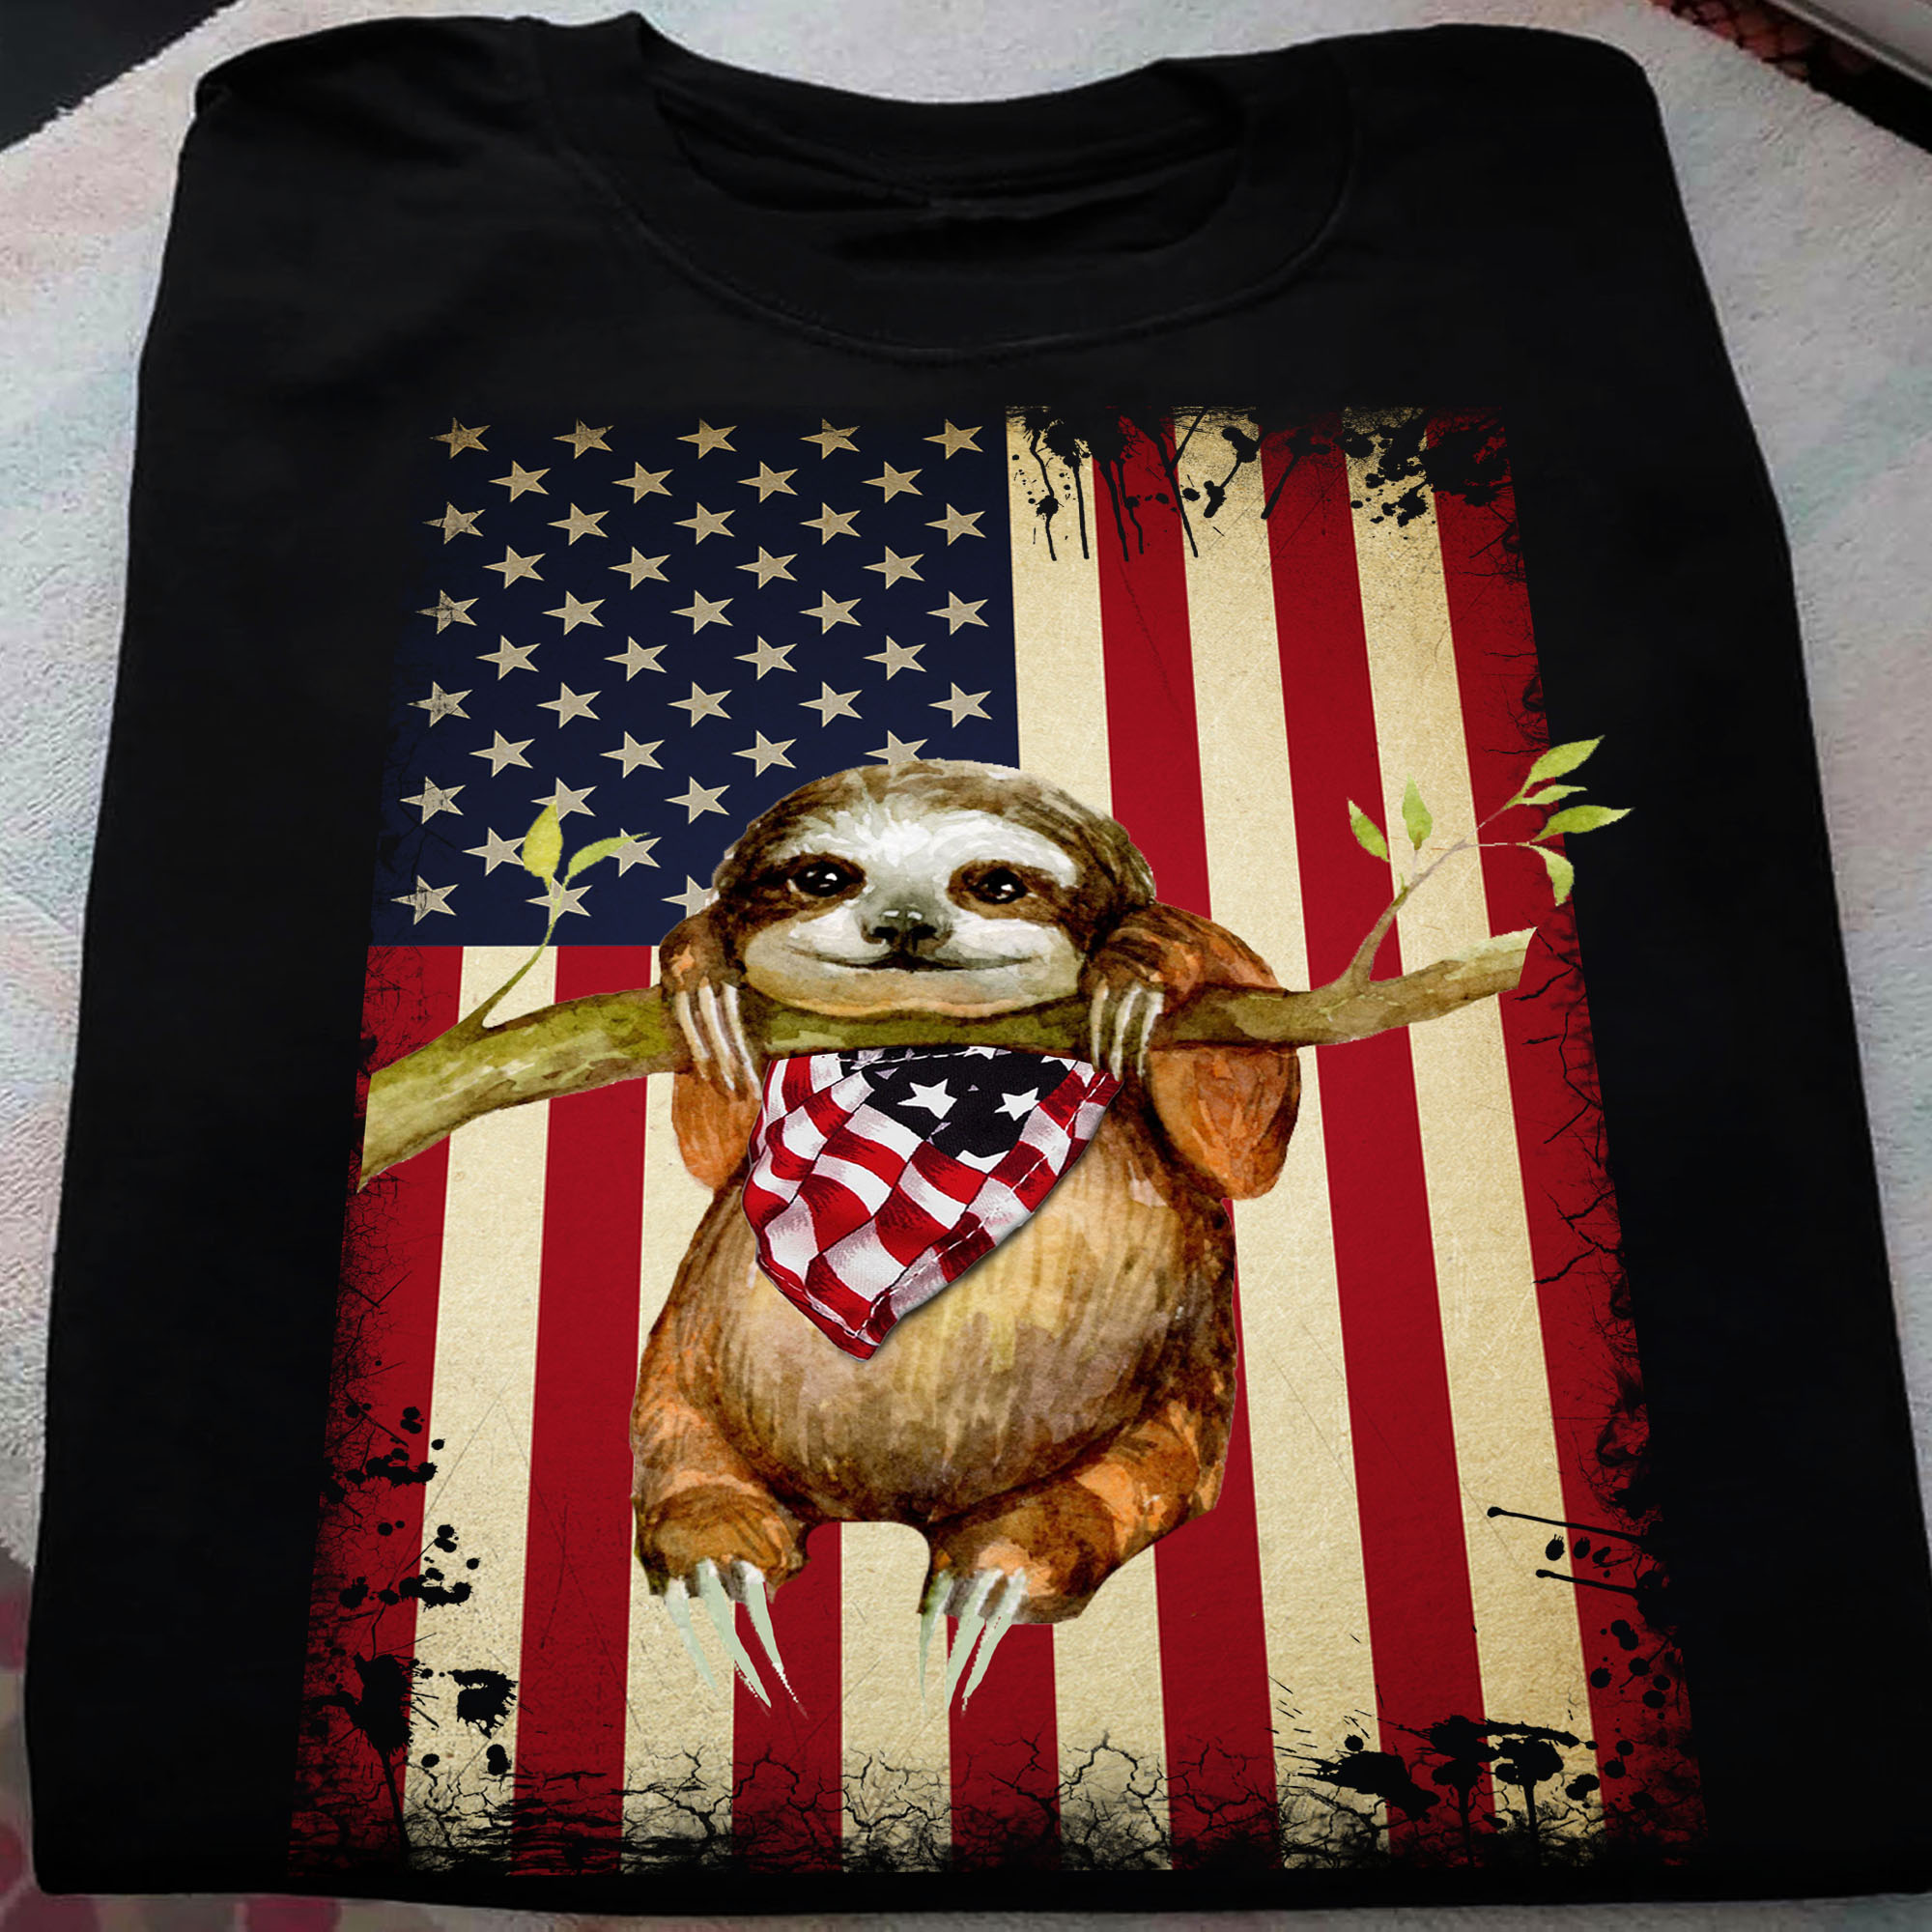 Grumpy sloth, sloth lover - America flag, independence day